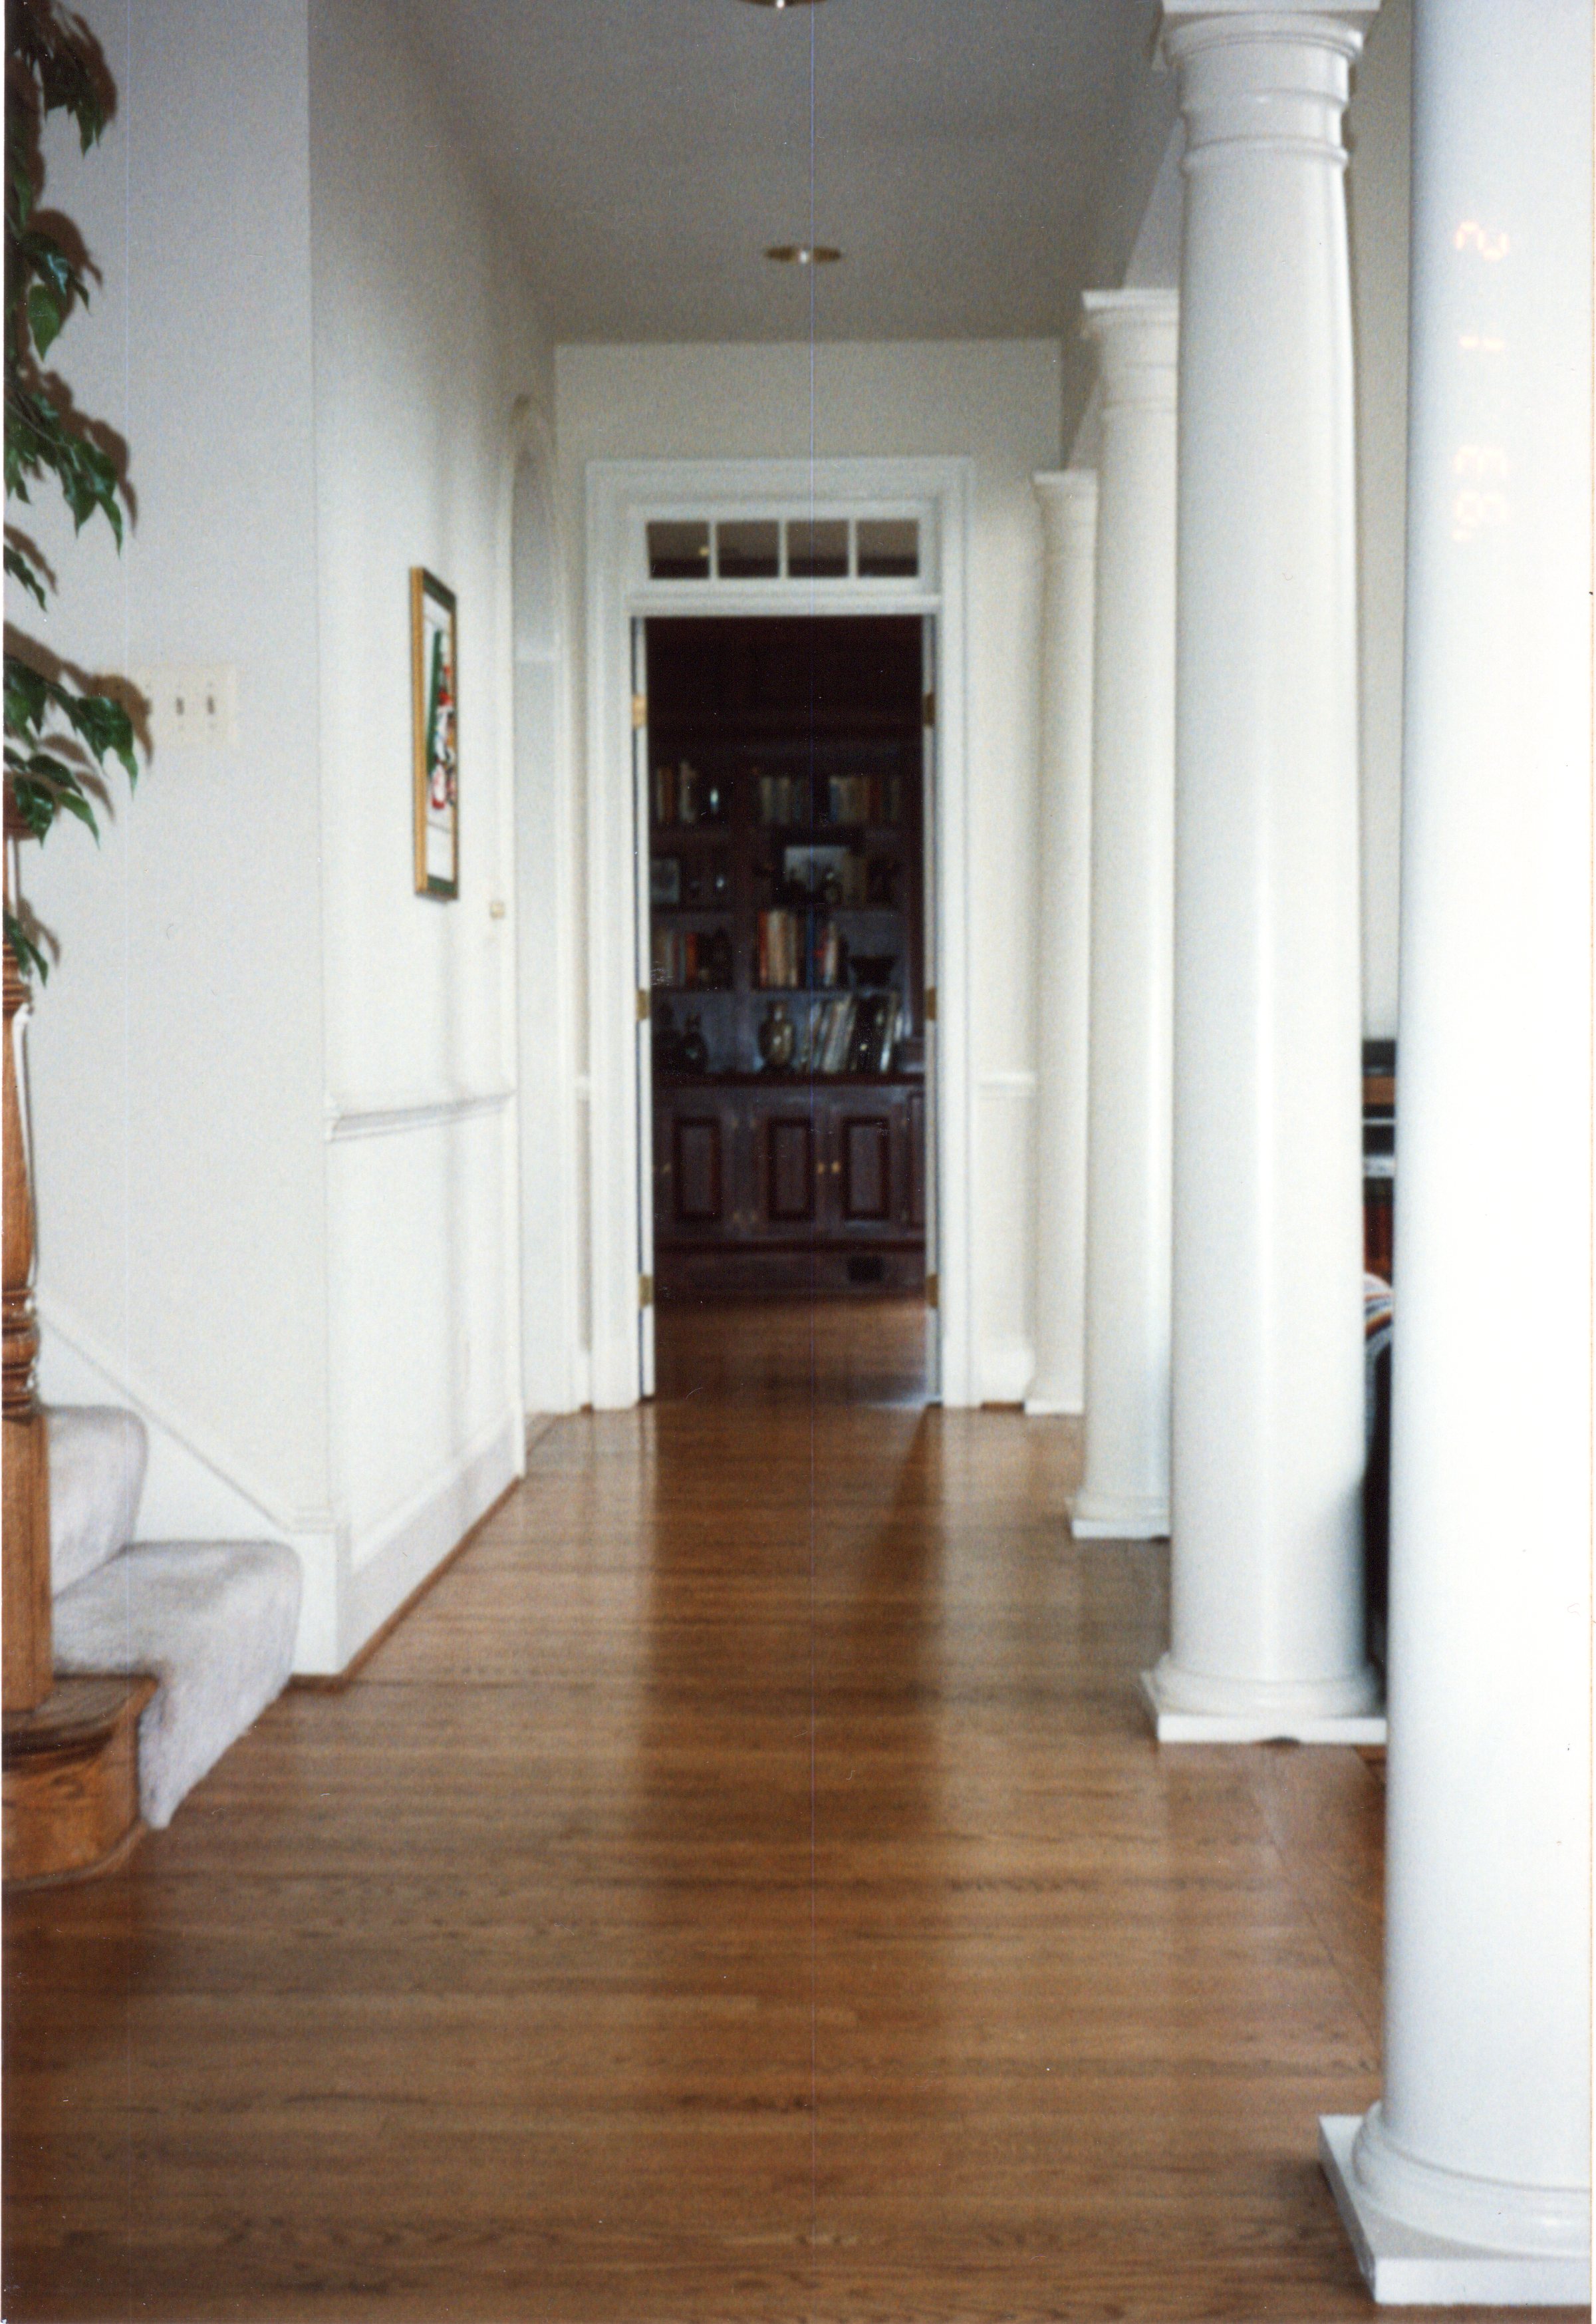 Hallway to Library